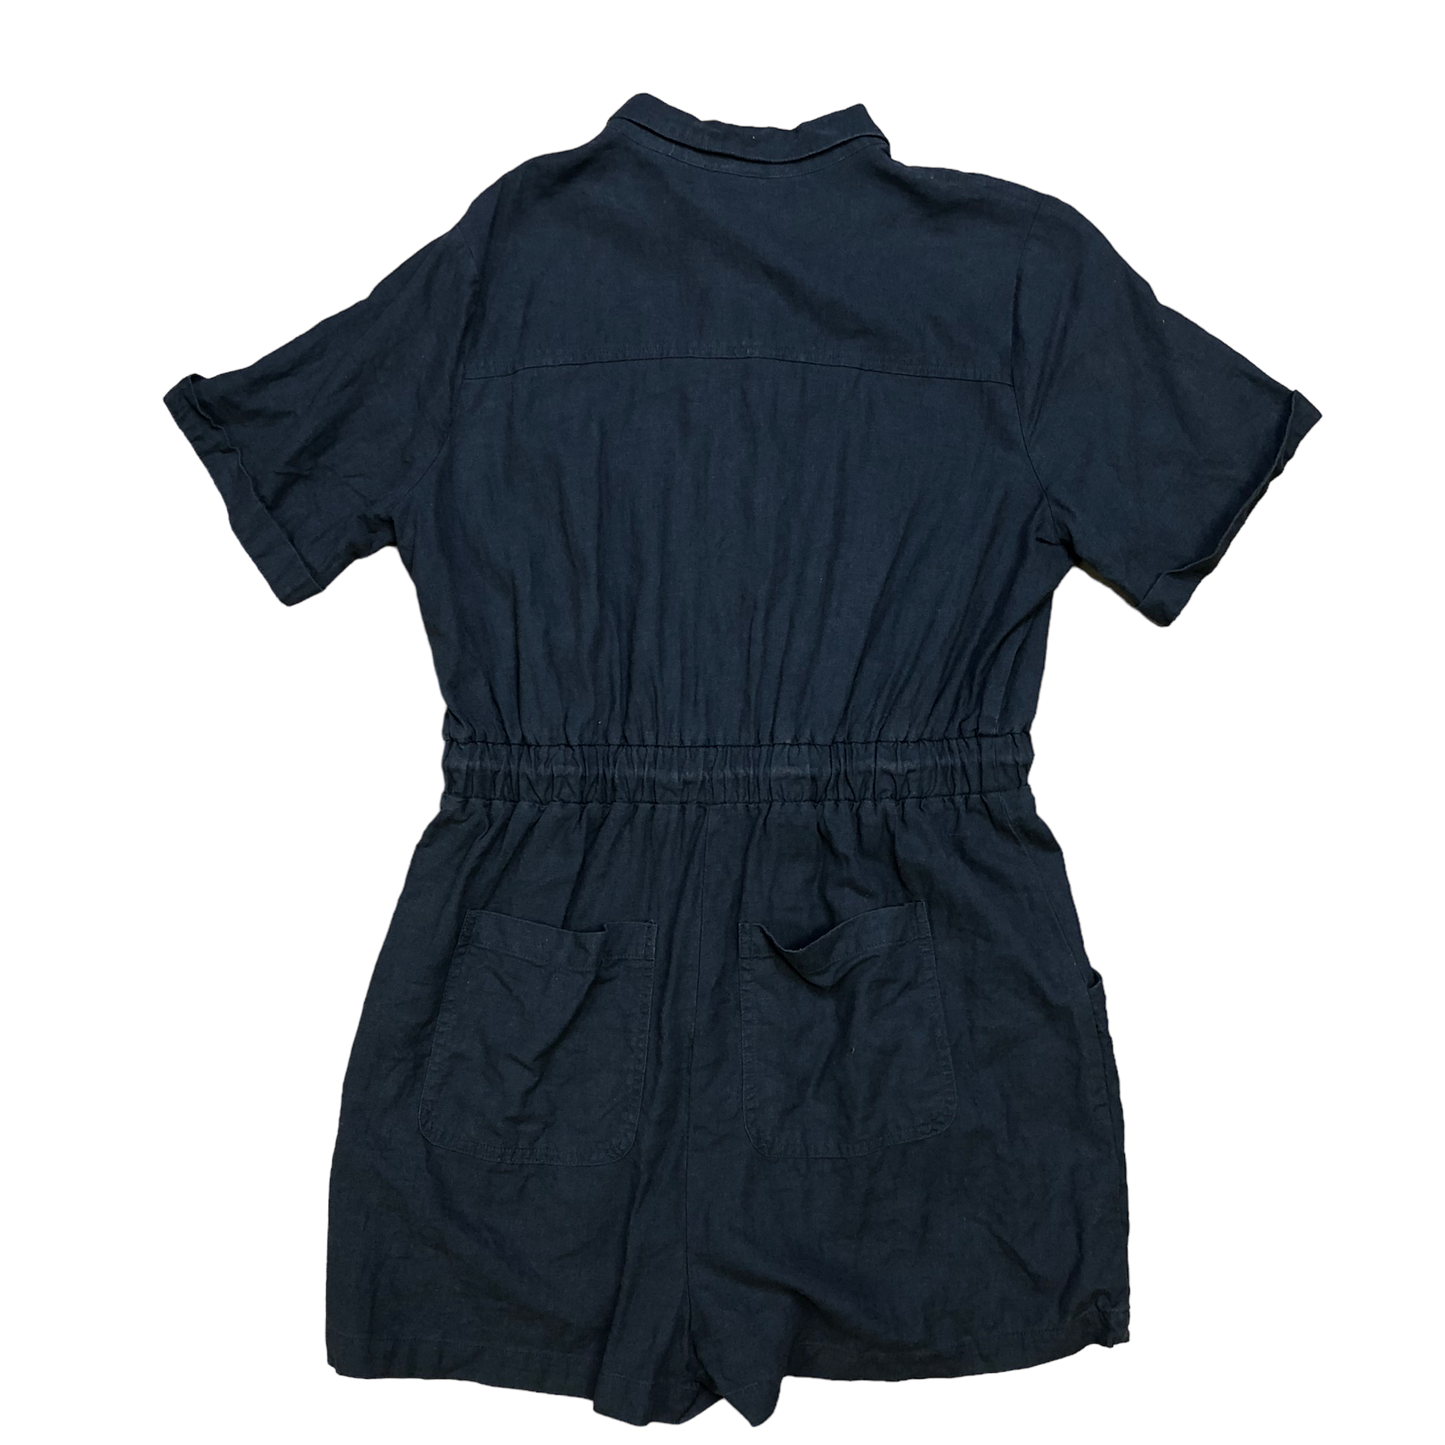 Romper By Universal Thread  Size: M